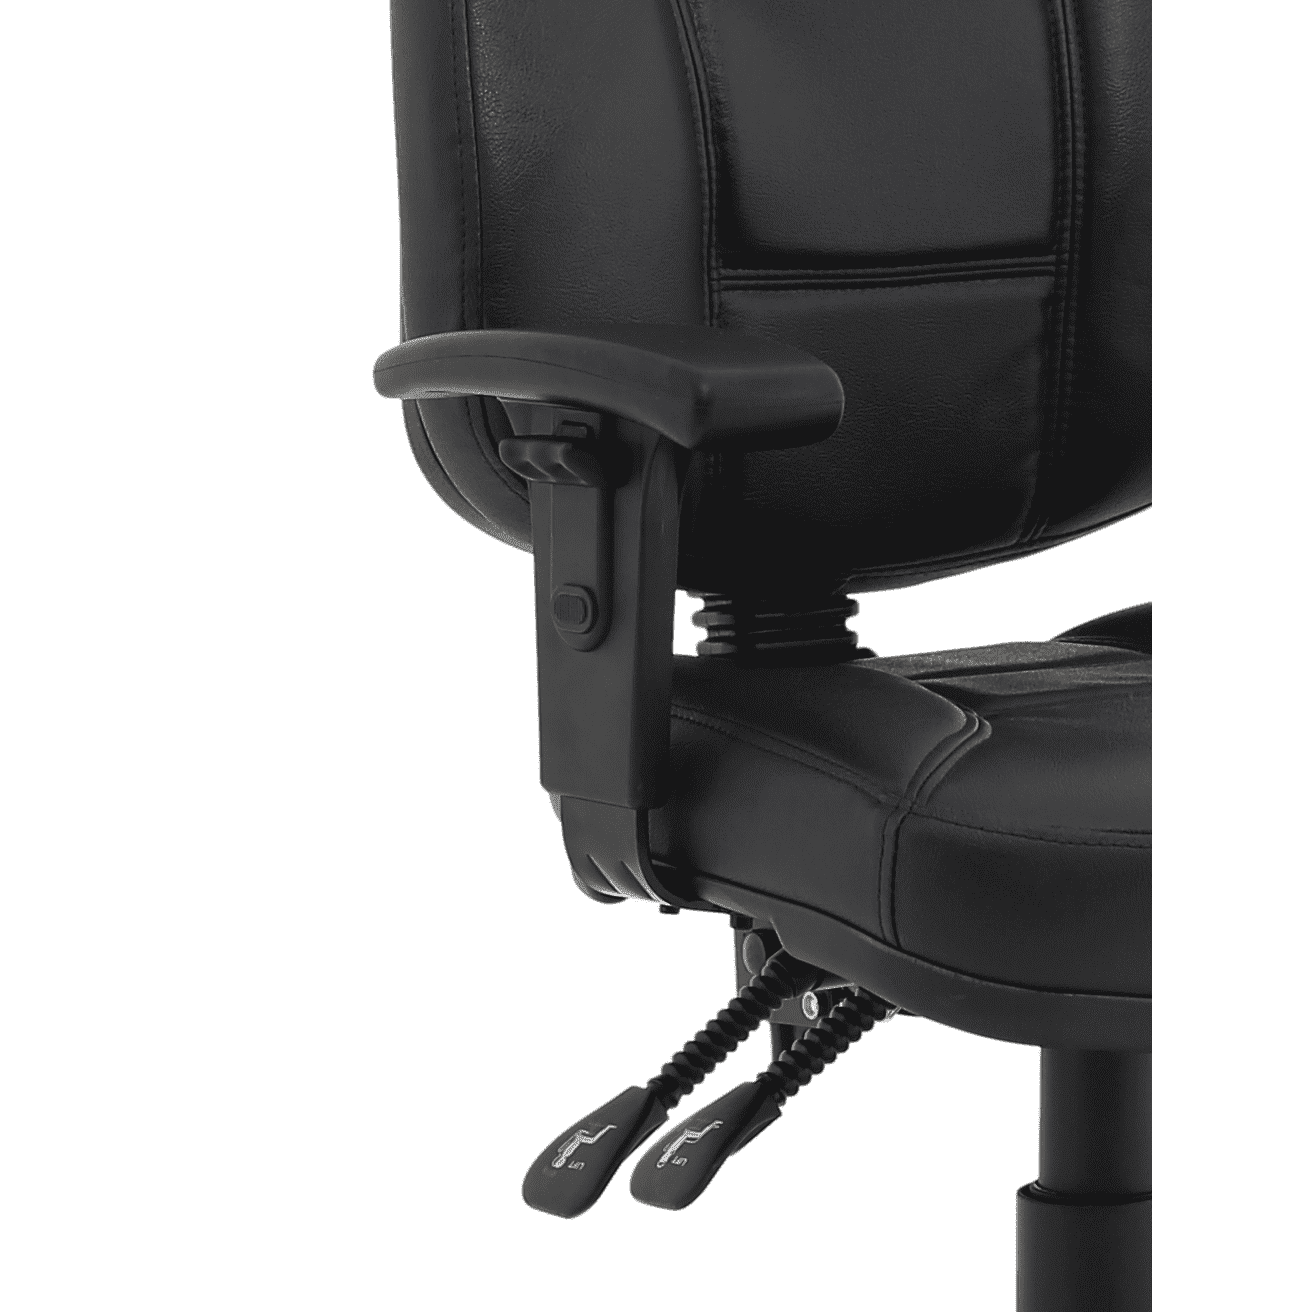 Jackson Height Adjustable Arms Office Chair - Soft Bonded Leather, Flat Packed, 1-Year Guarantee, 14kg - 94019080